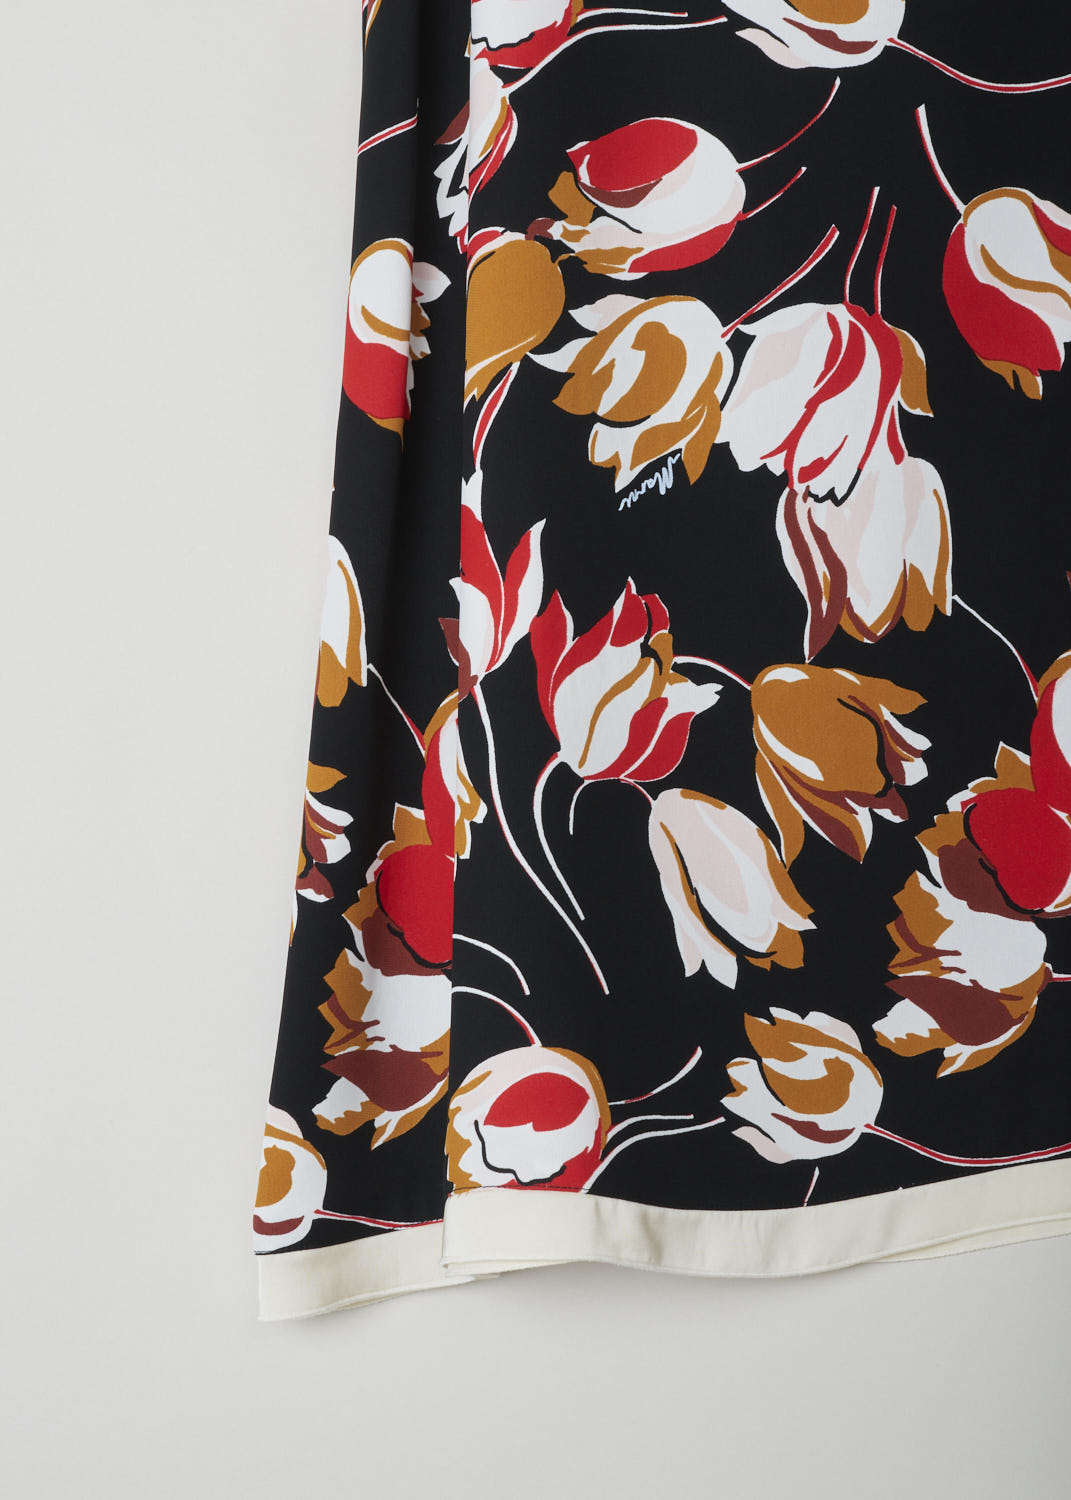 MARNI, BLACK A-LINE SKIRT WITH RED FLORAL PRINT, GOMA0042Q0_UTV844_WIIN99, Black, Print, Detail, This black A-line skirt has a floral print in shades of reds and browns. A concealed side zip functions as the closing option. The skirt has a white satin hemline.  
